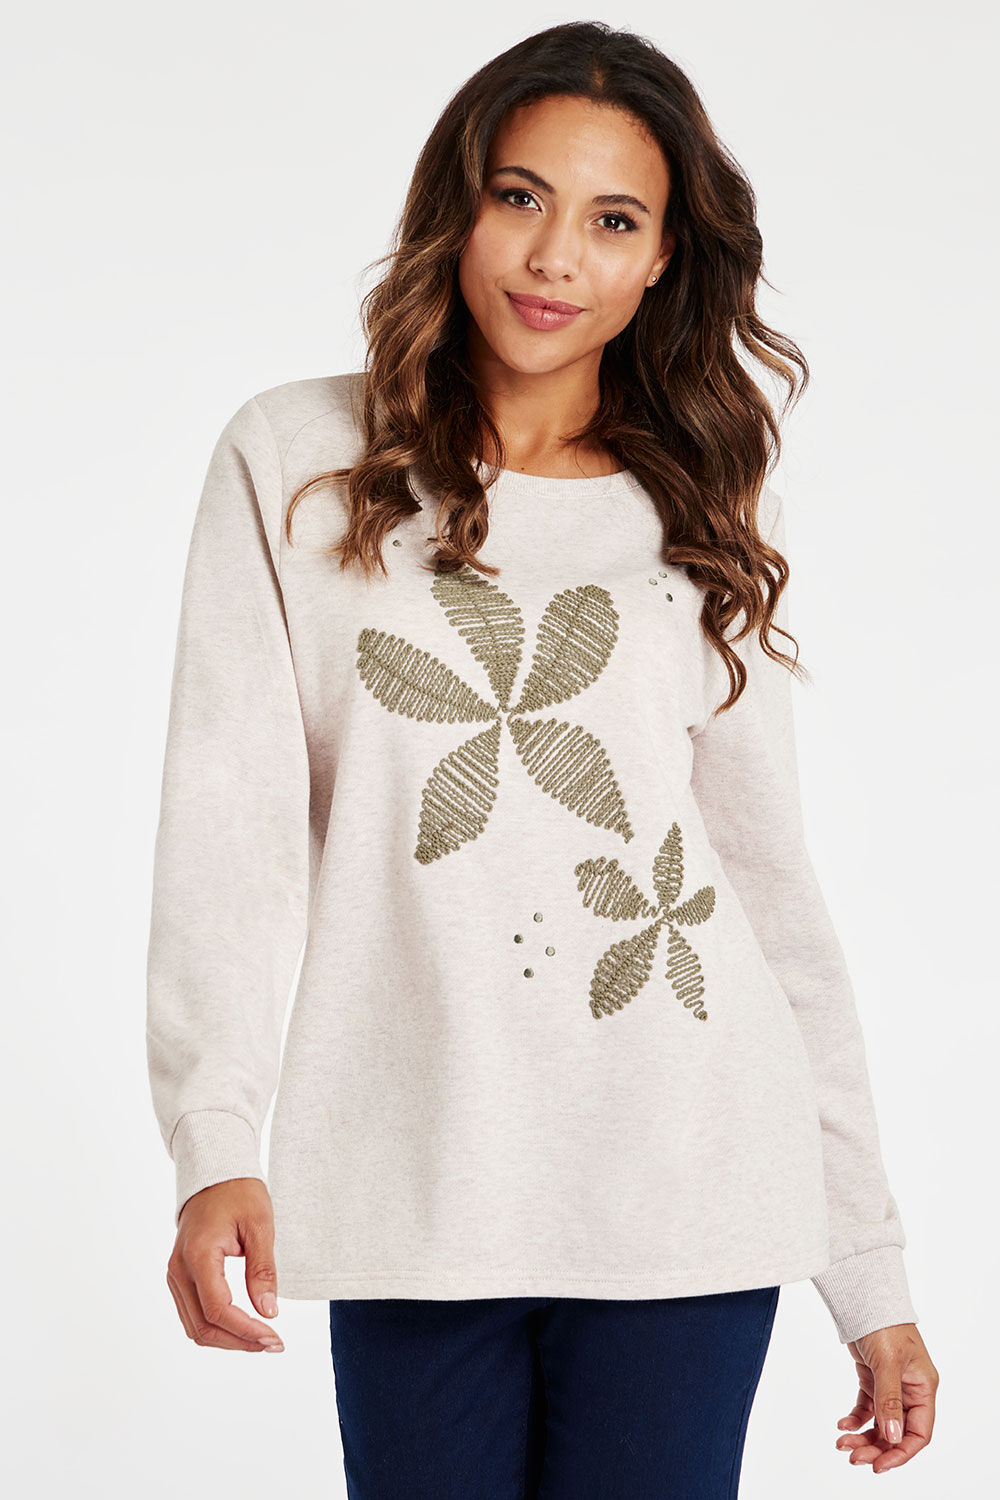 Bonmarche Natural Long Sleeve Flower Embroidered Sweatshirt, Size: 10